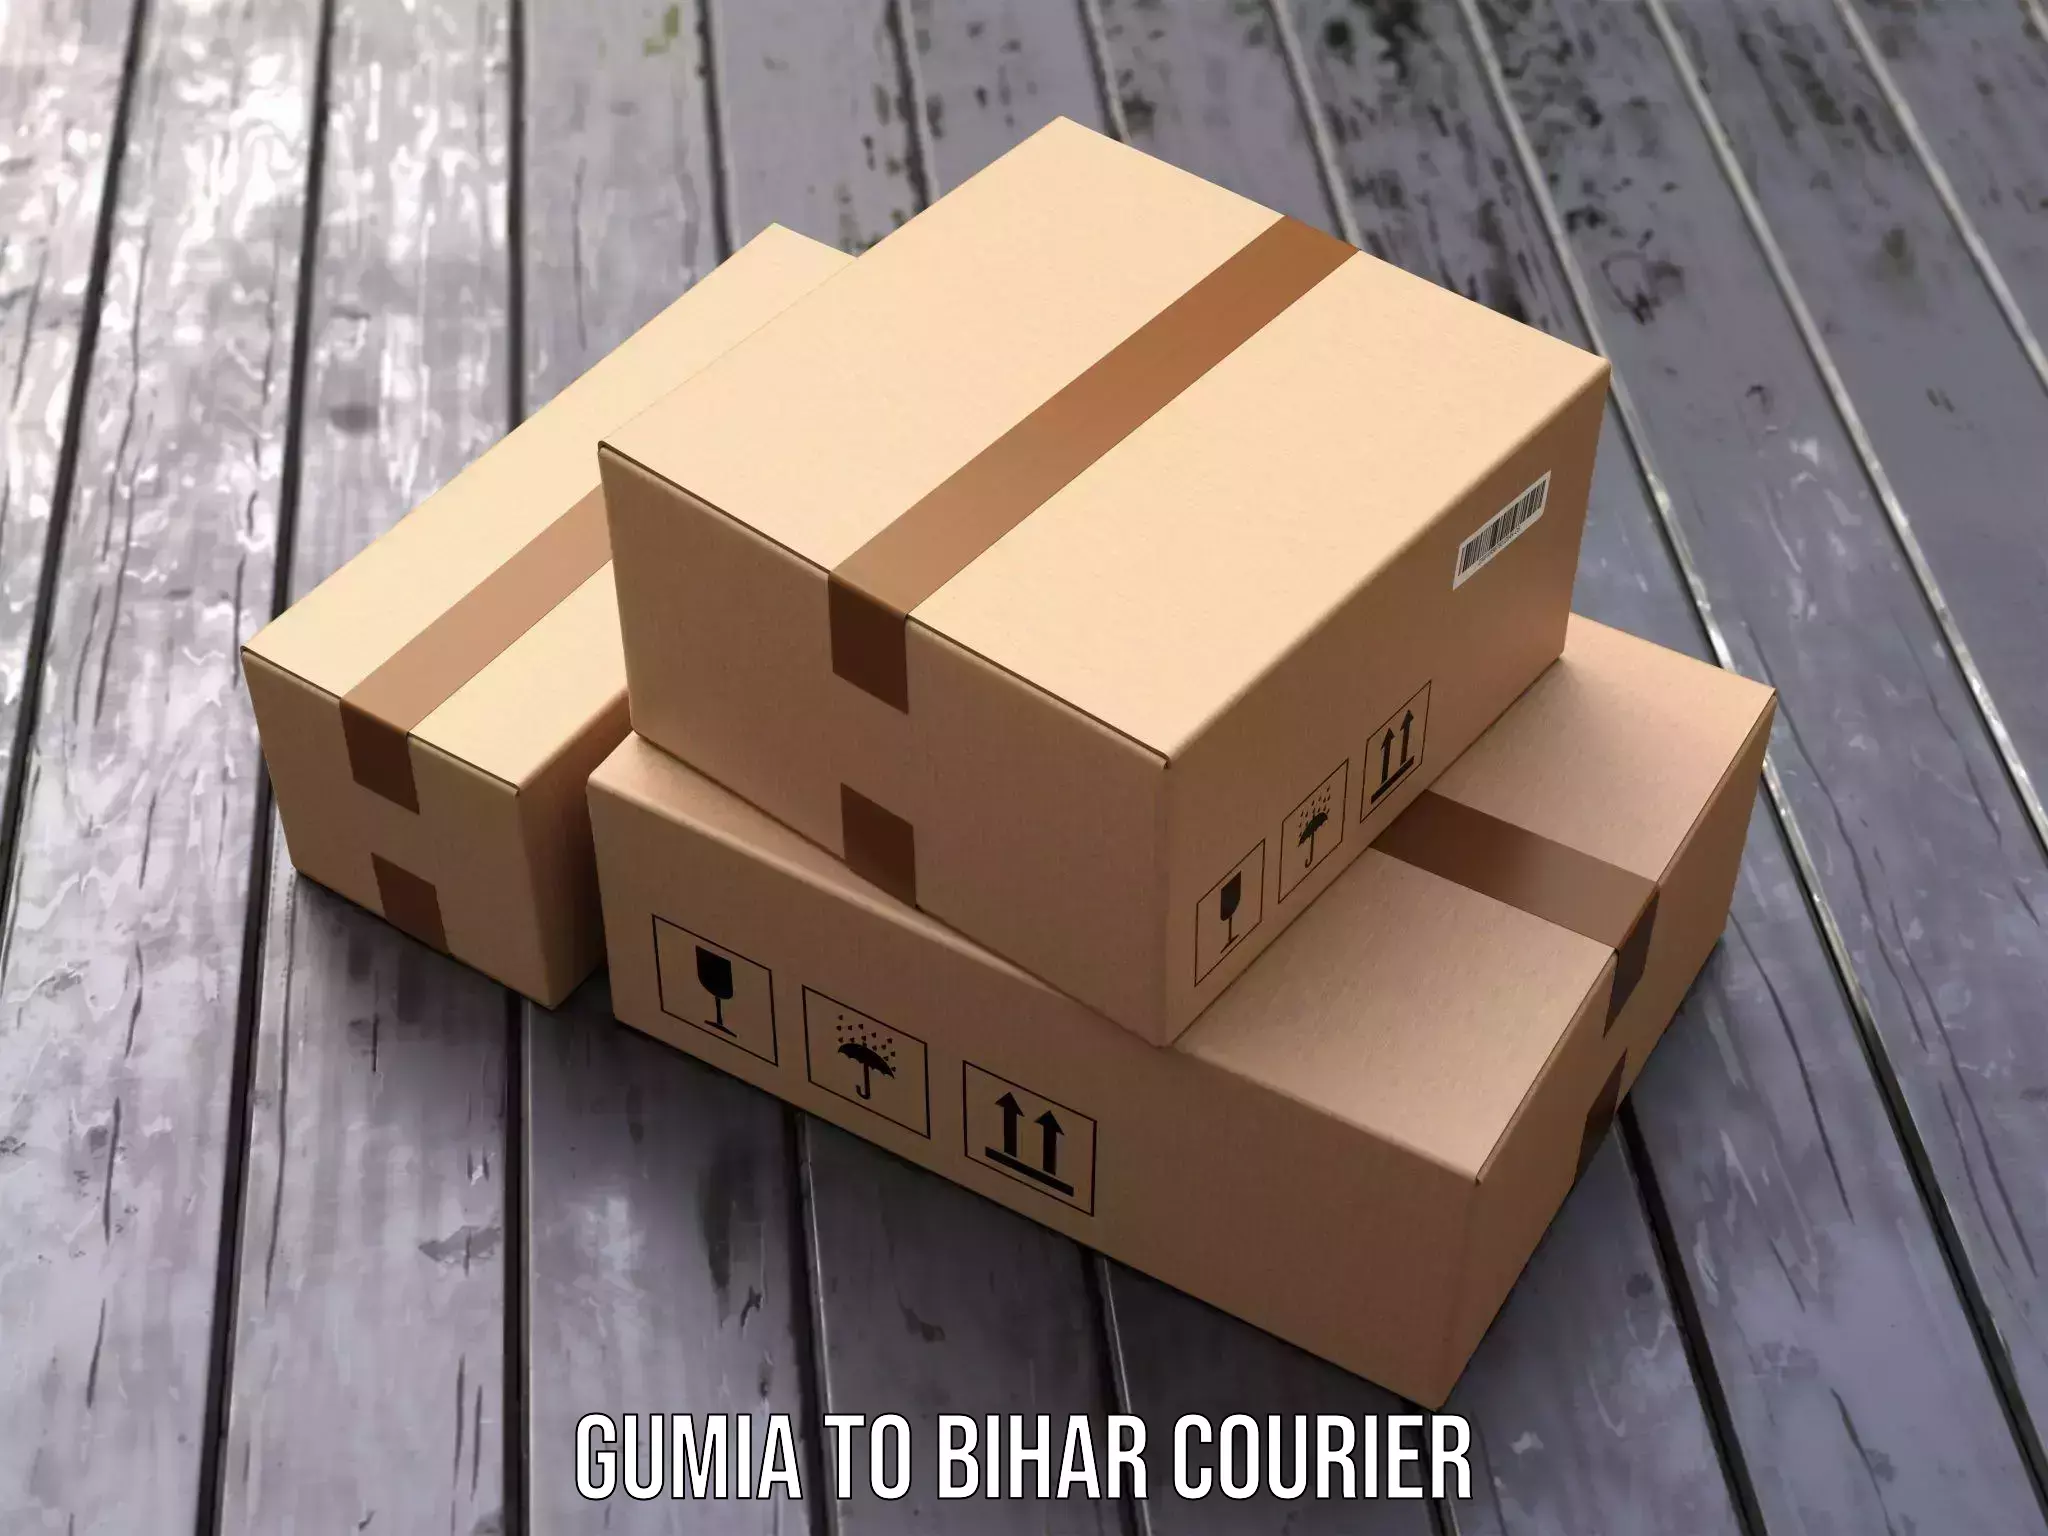 Professional courier handling Gumia to Bihar